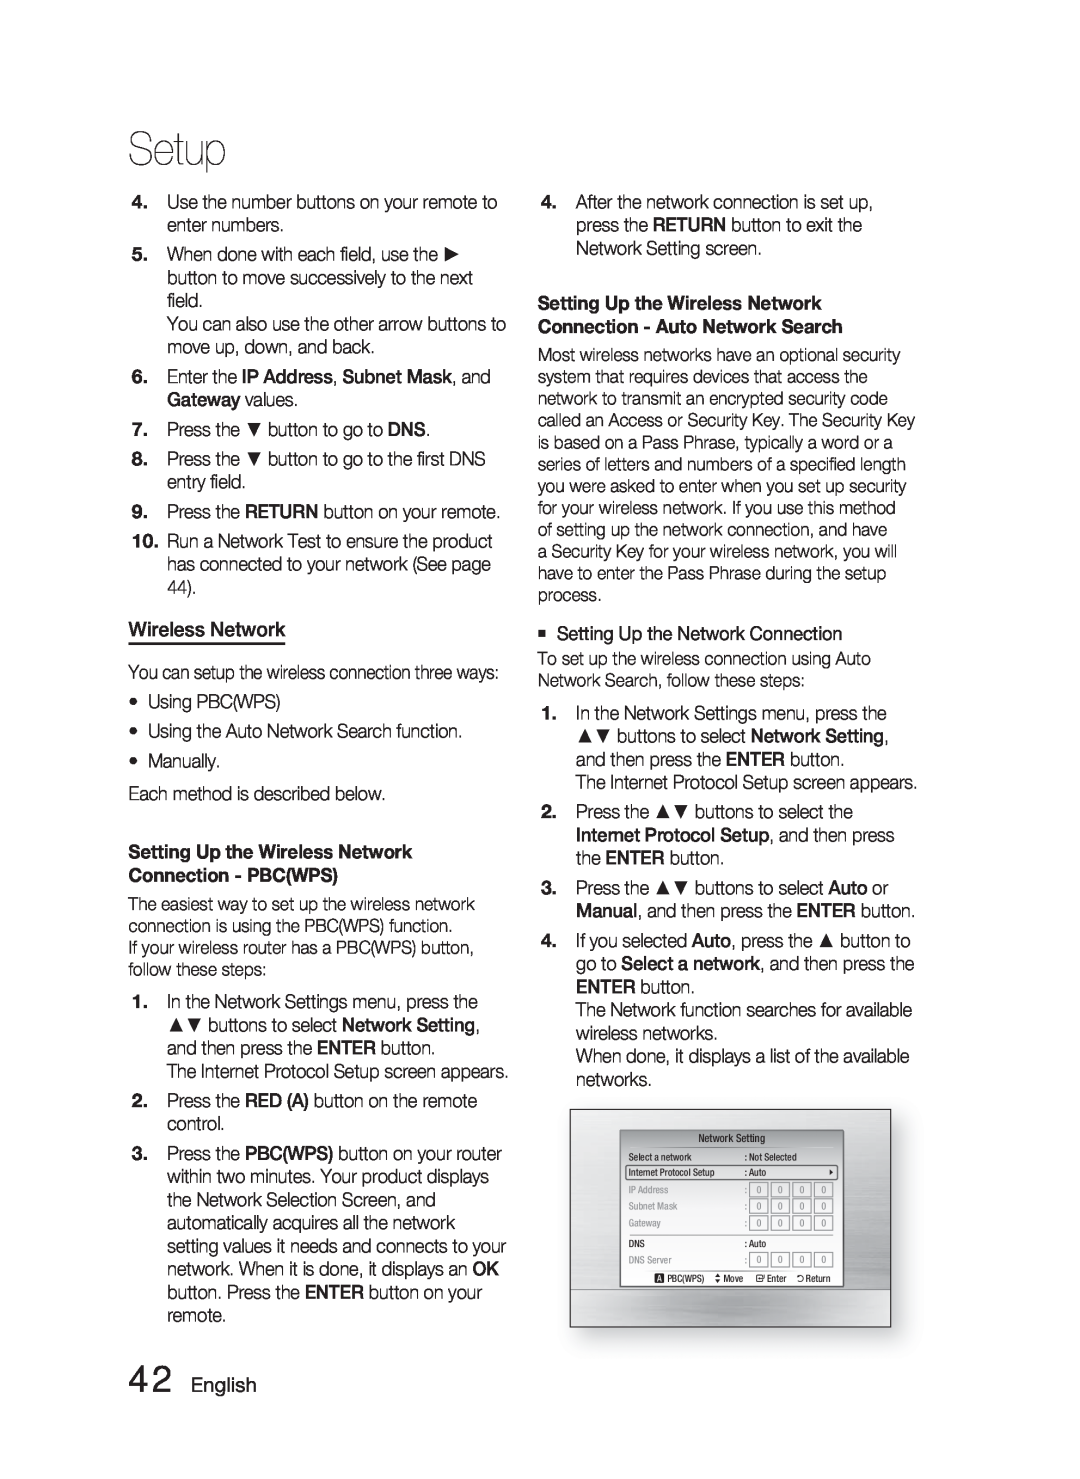 Samsung HT-C6900W user manual English, Setup, Setting Up the Wireless Network, Connection - PBCWPS 